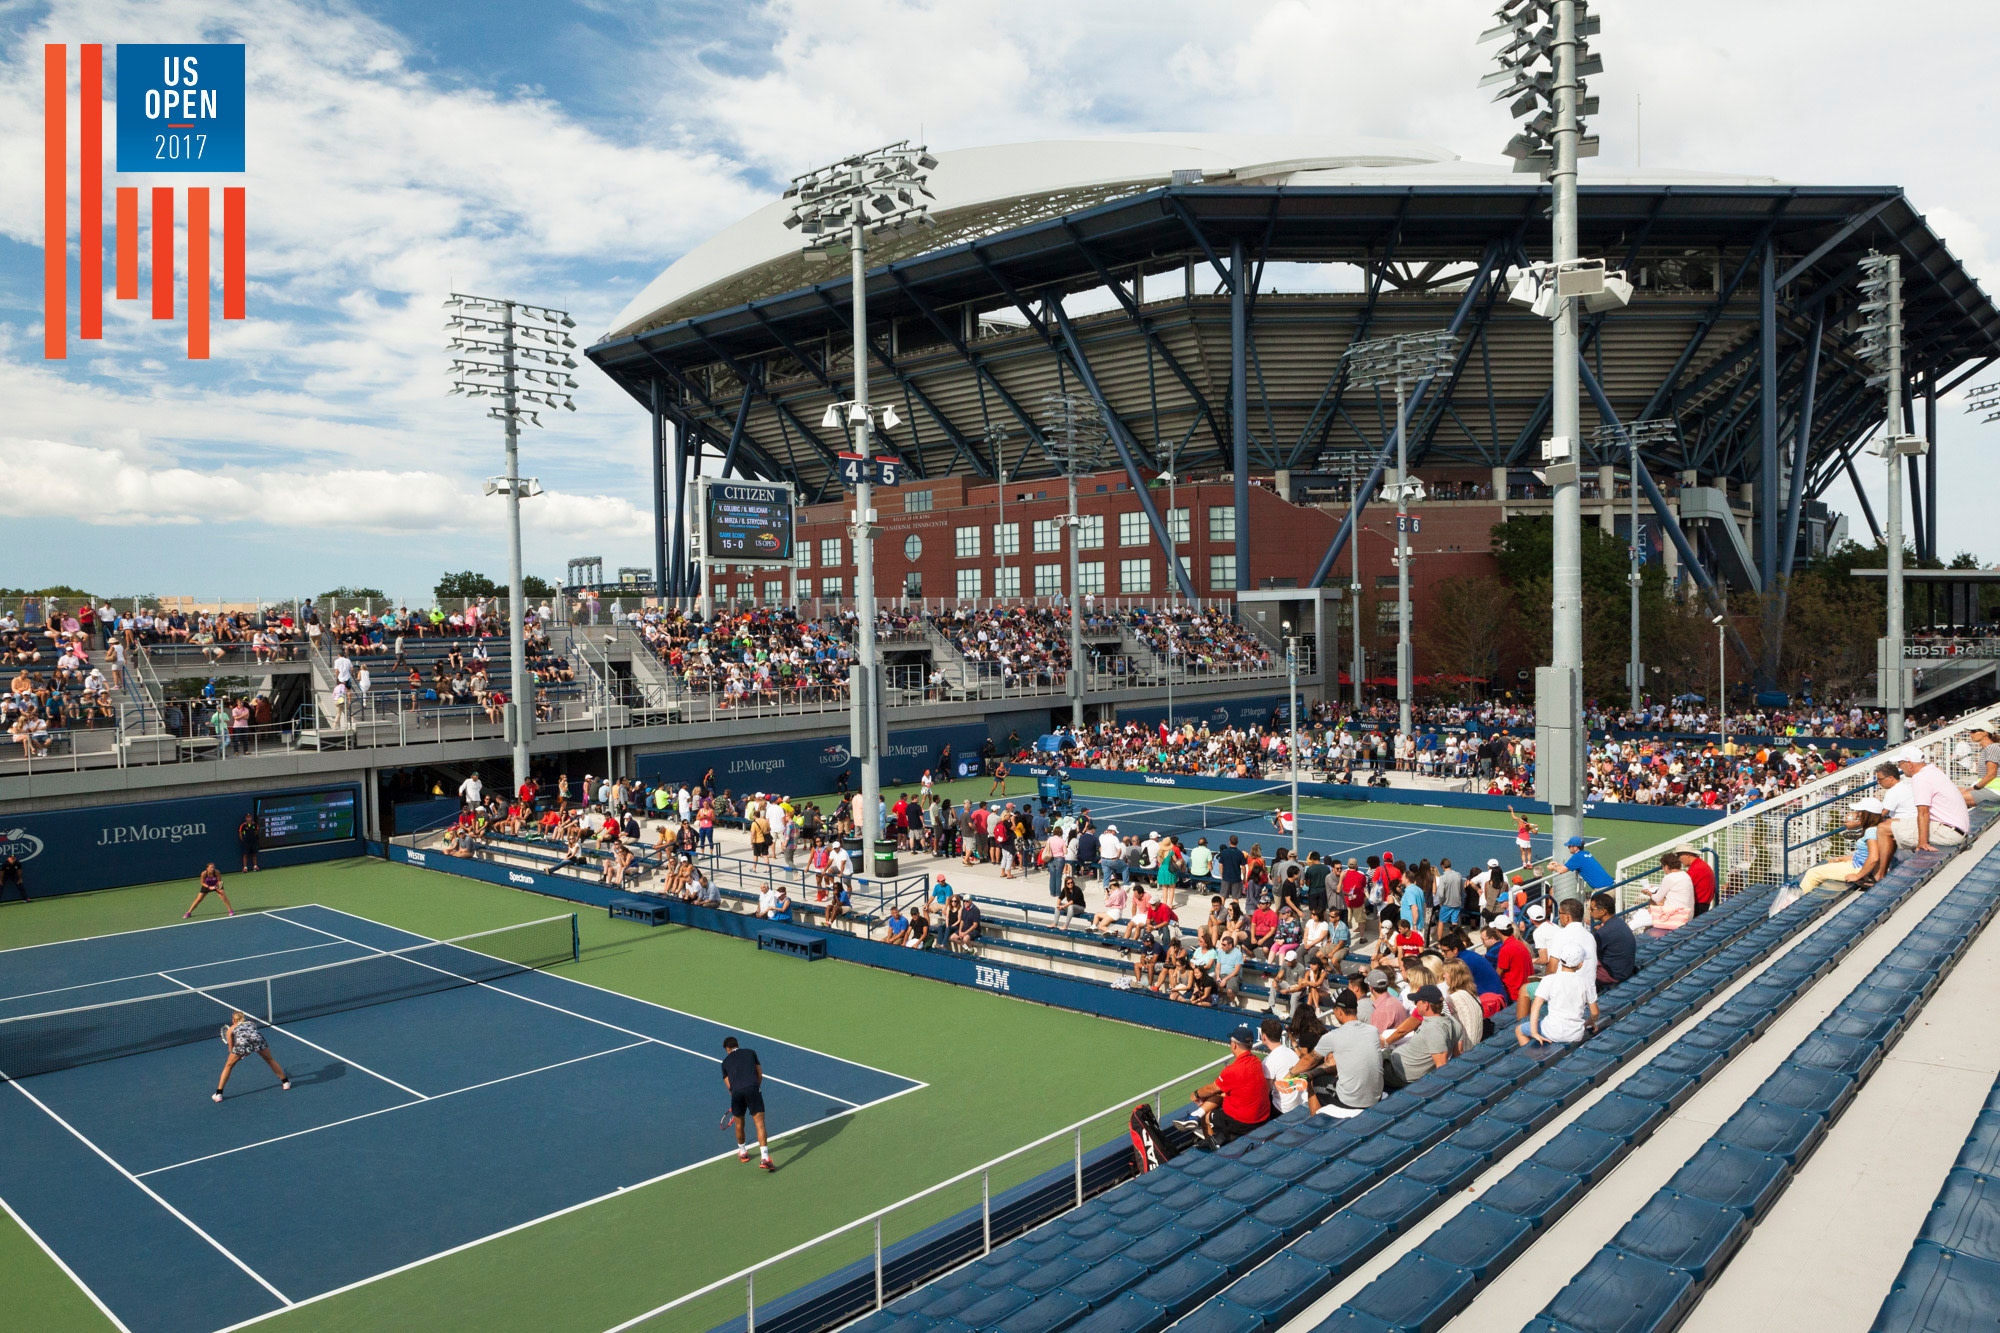 Ordering the Courts: Ranking the spots to watch US Open tennis Tennis com